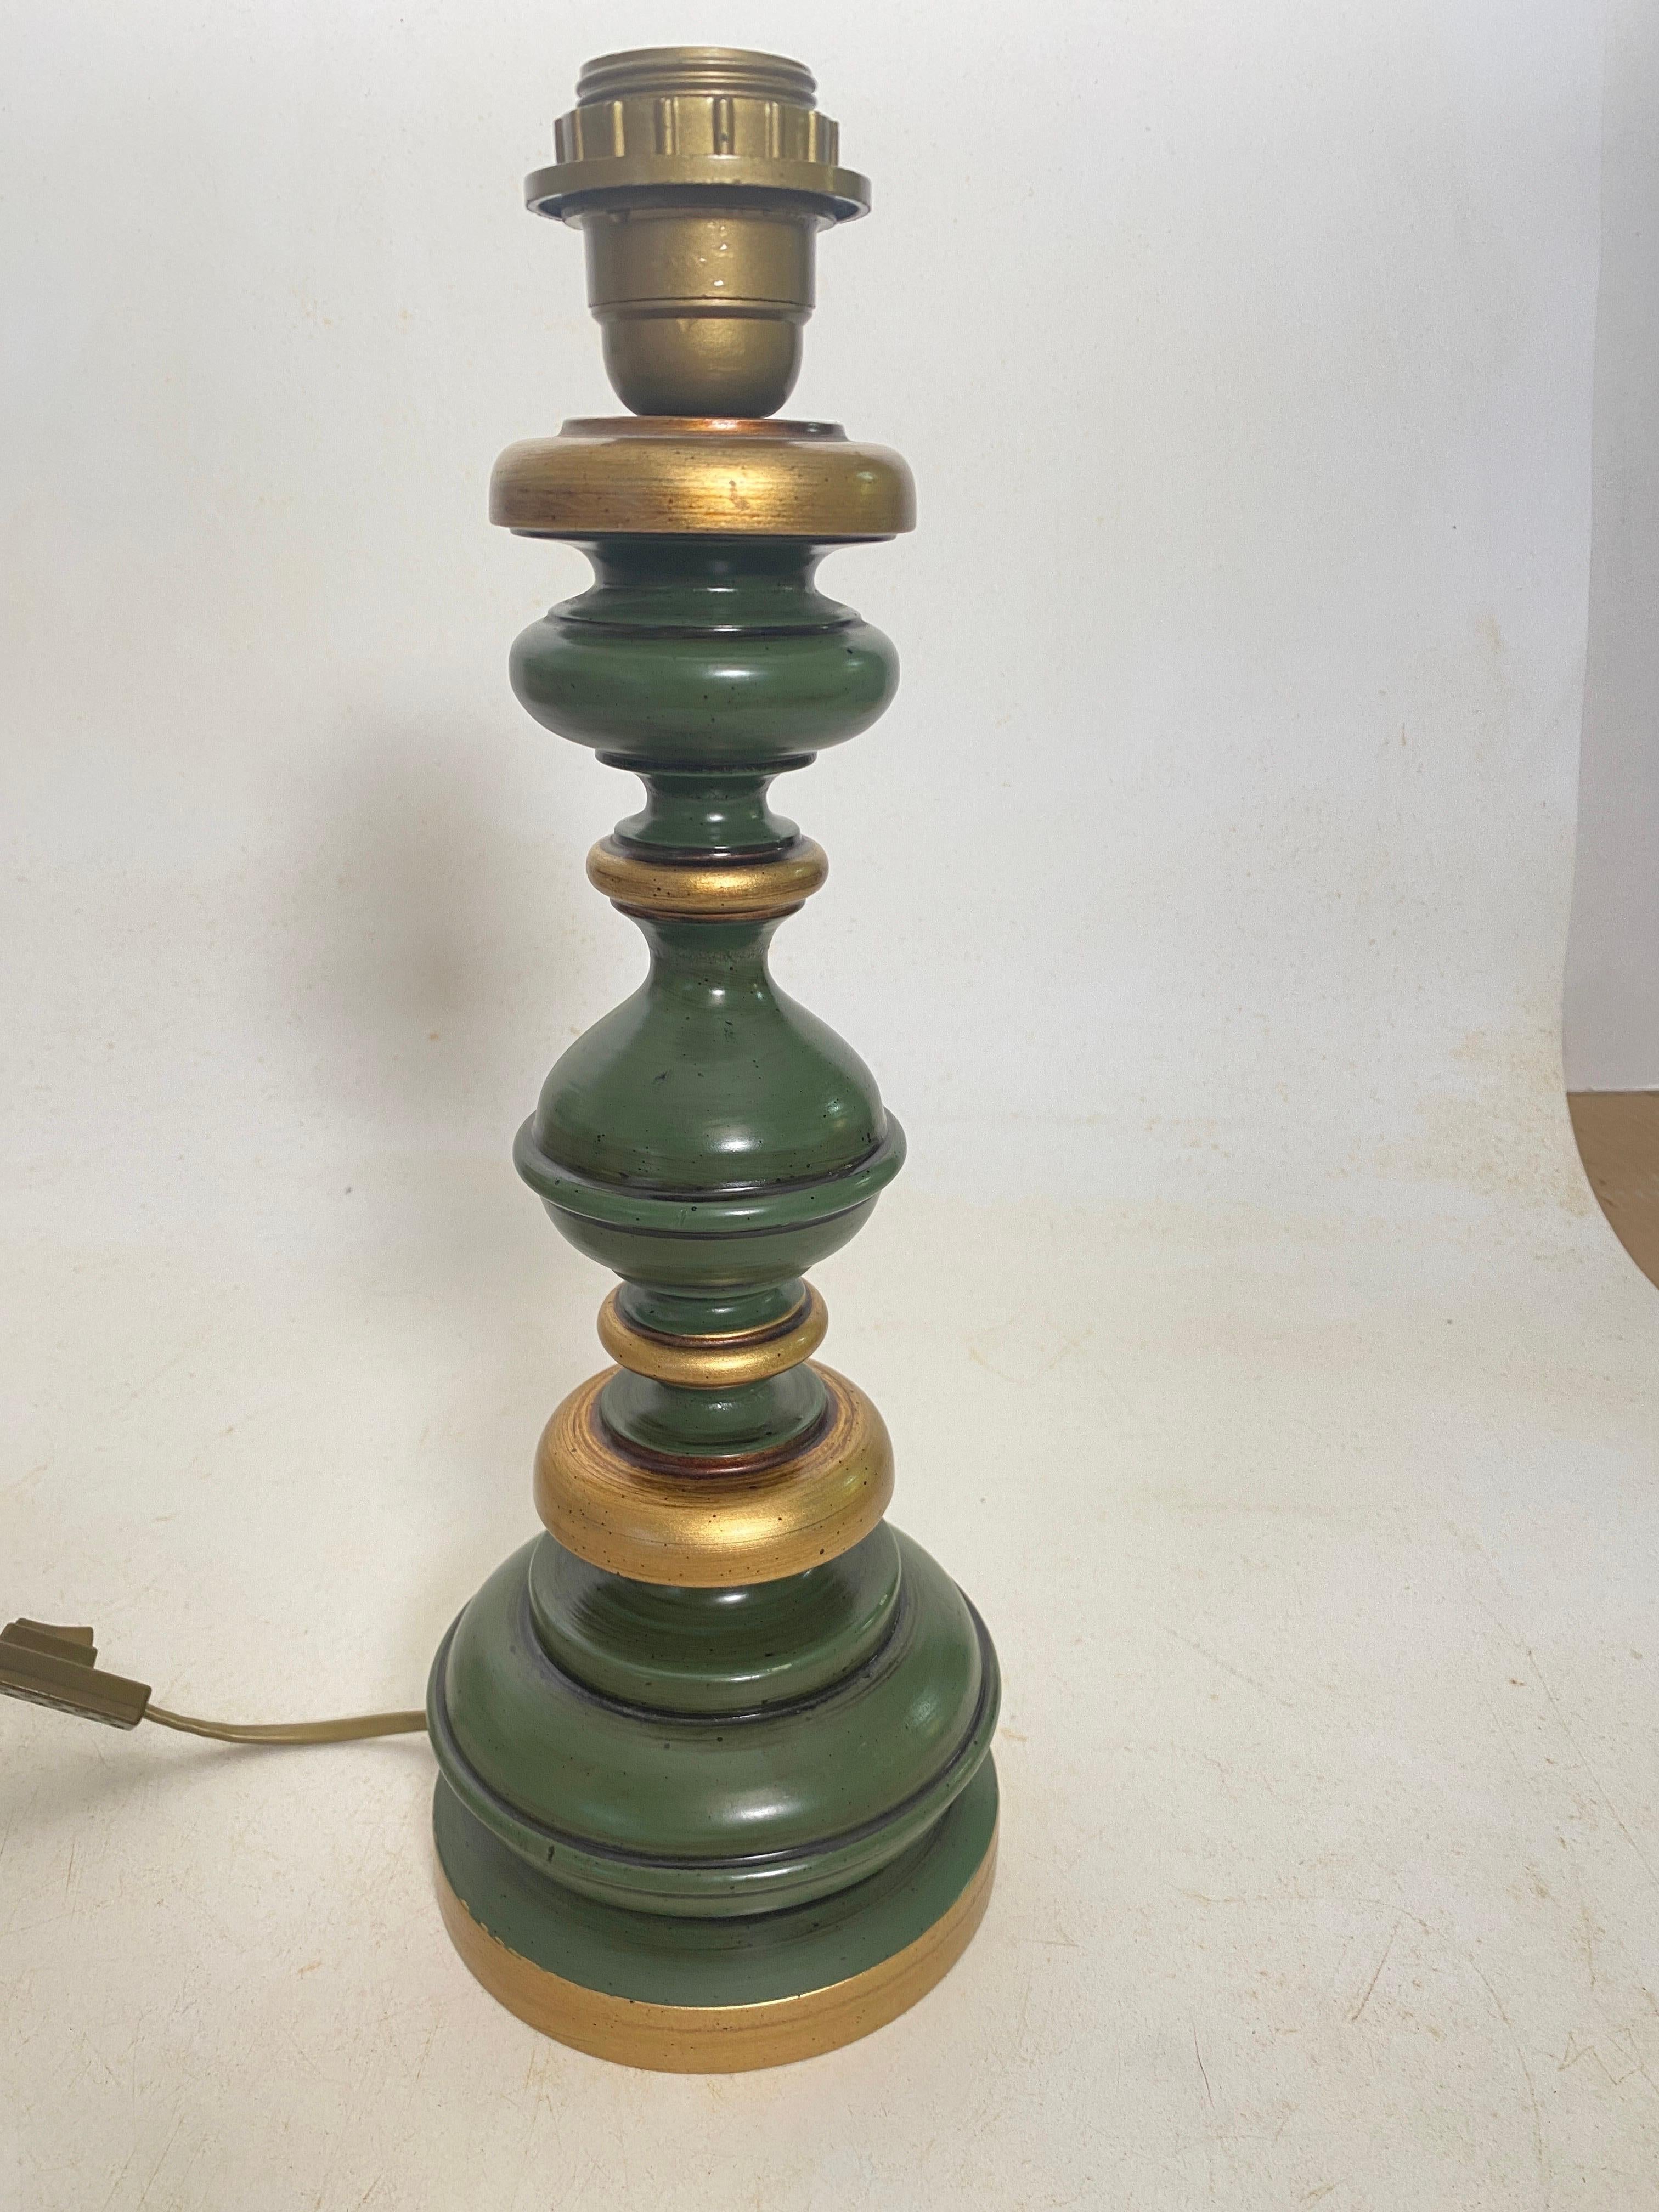 Wood Table Lamp, Made in France, Green Color, Circa 1970 For Sale 3